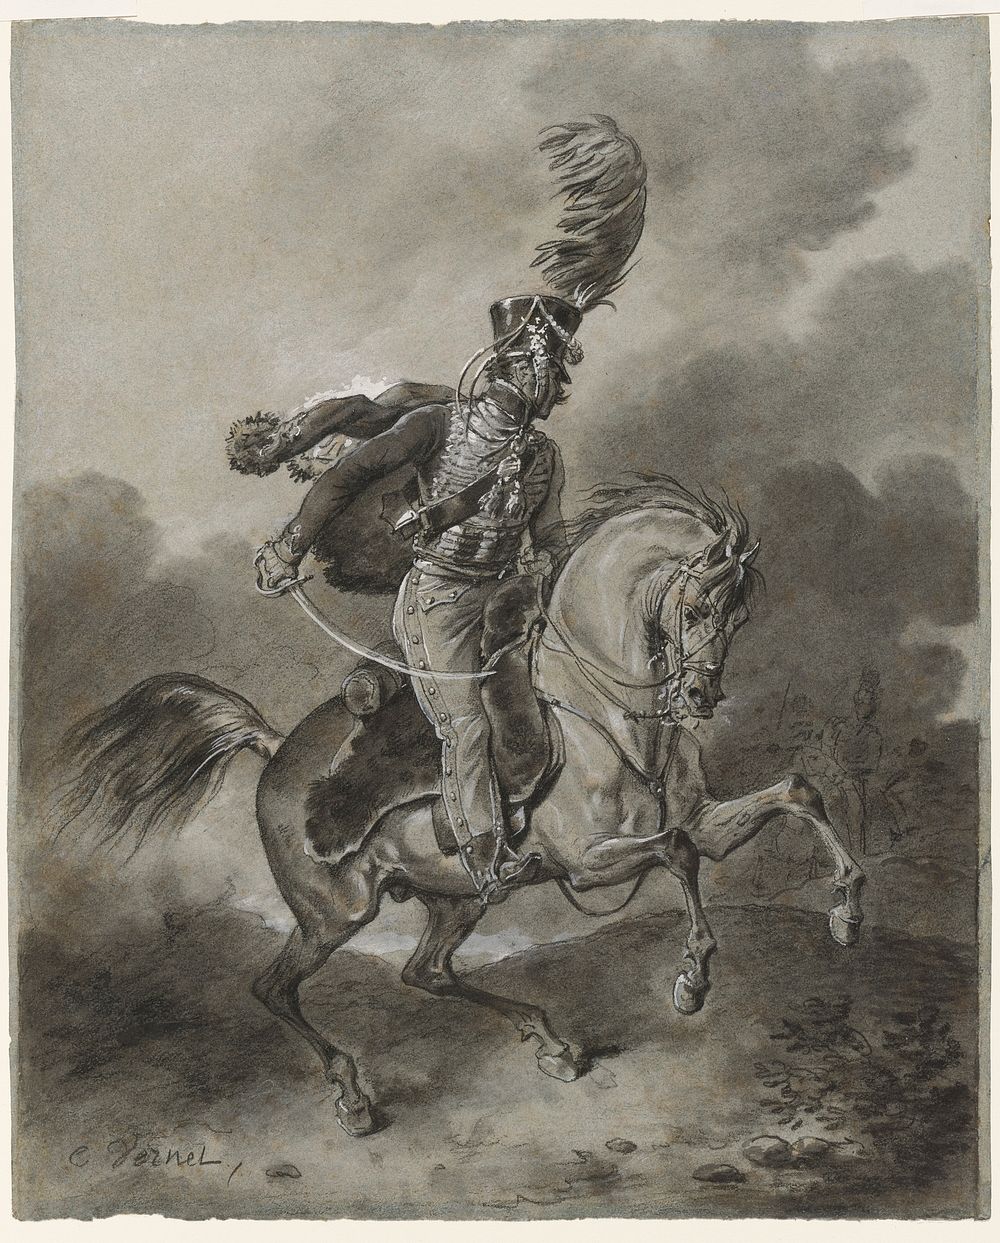 soldier wearing an elaborate uniform and carrying a curved sword, riding a prancing horse; stormy skies. Original from the…